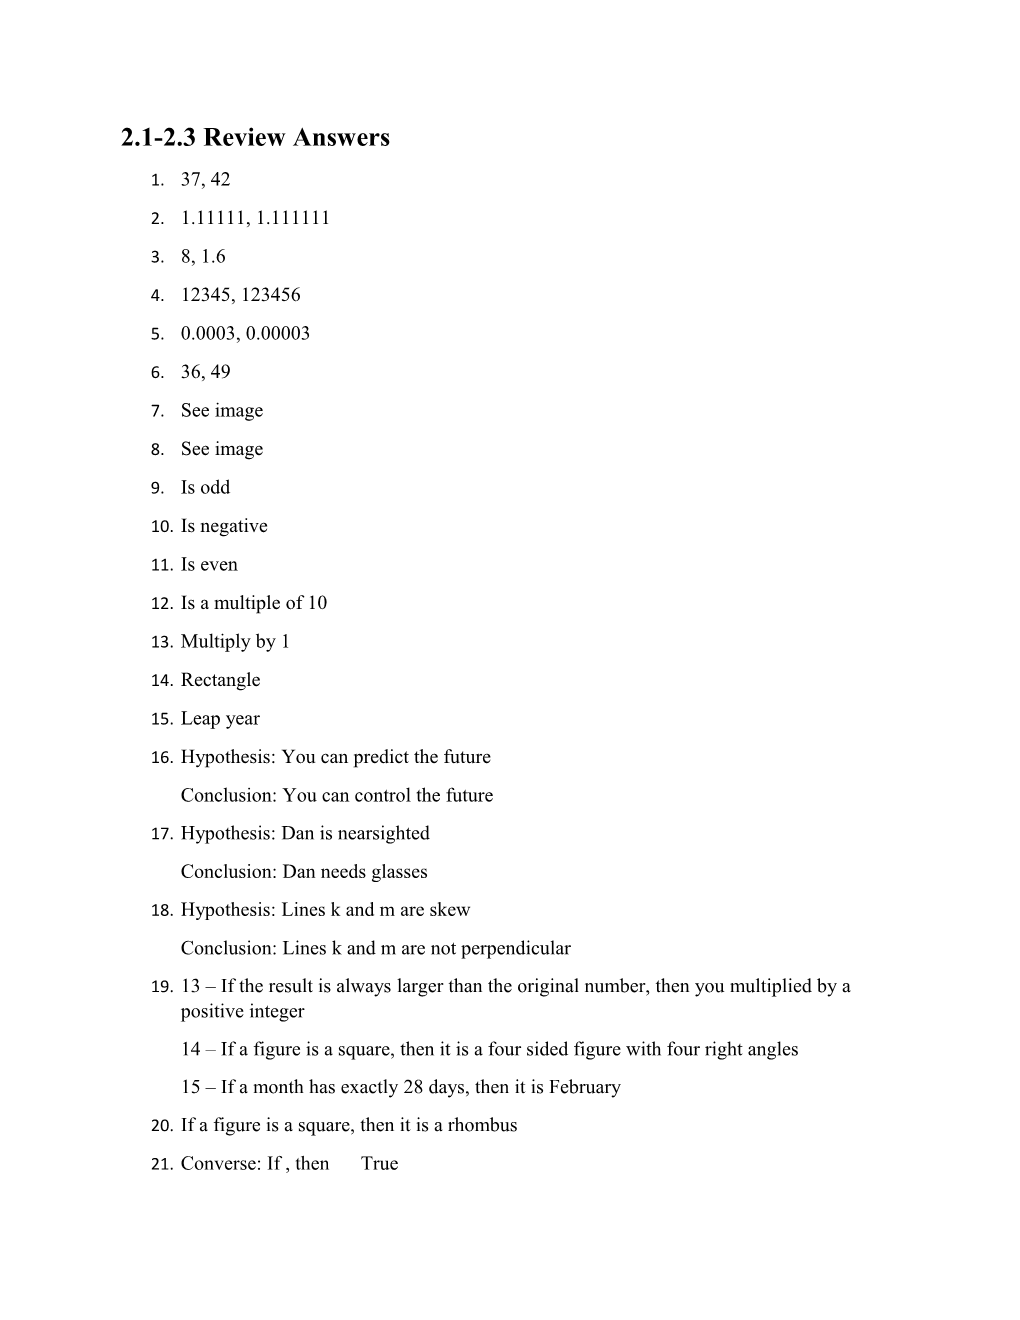 2.1-2.3 Review Answers